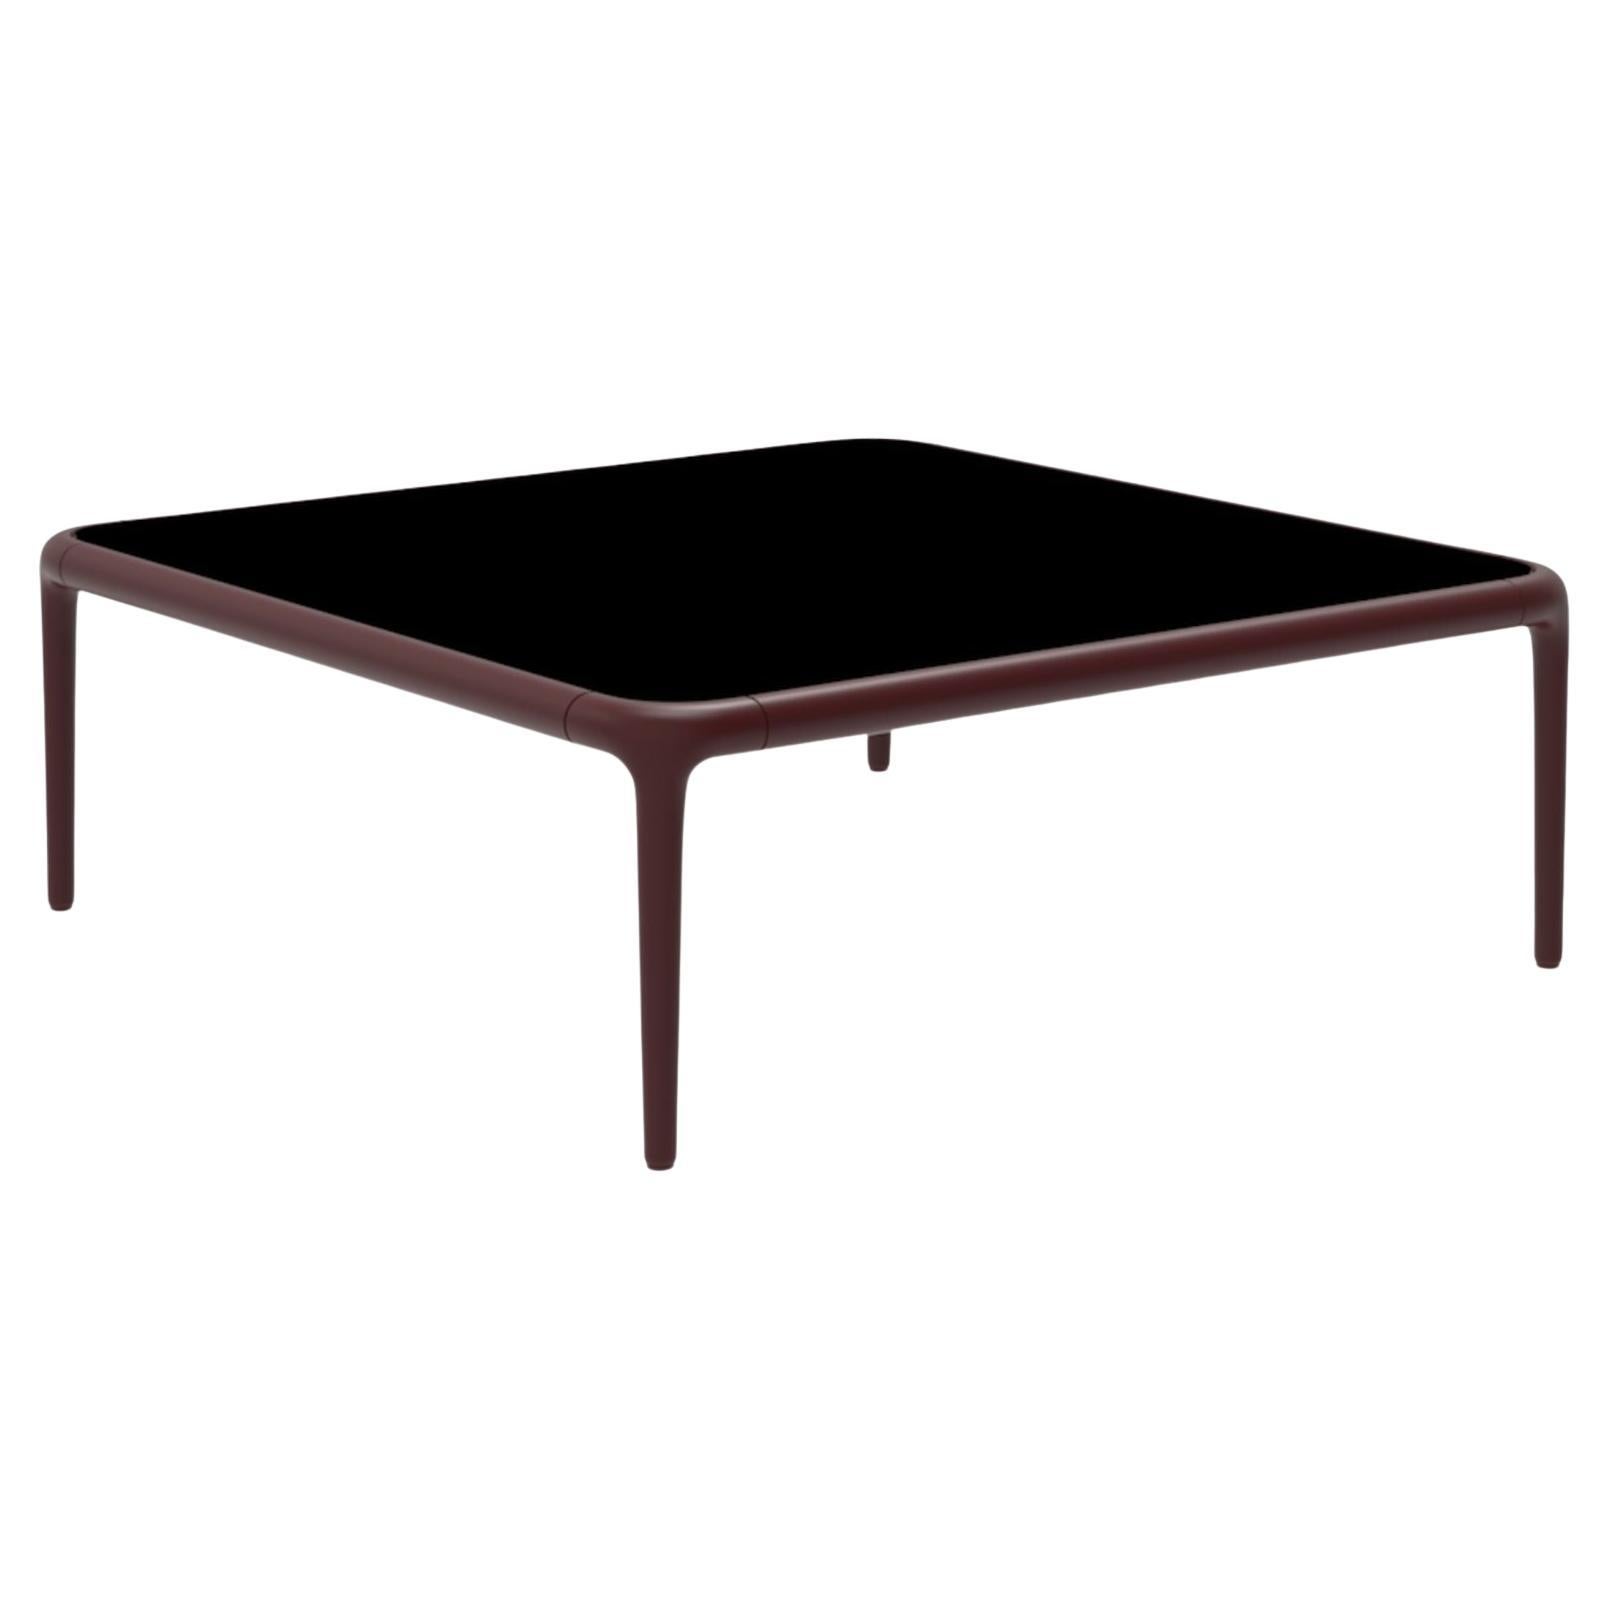 Xaloc Burgundy Coffee Table 80 with Glass Top by Mowee For Sale